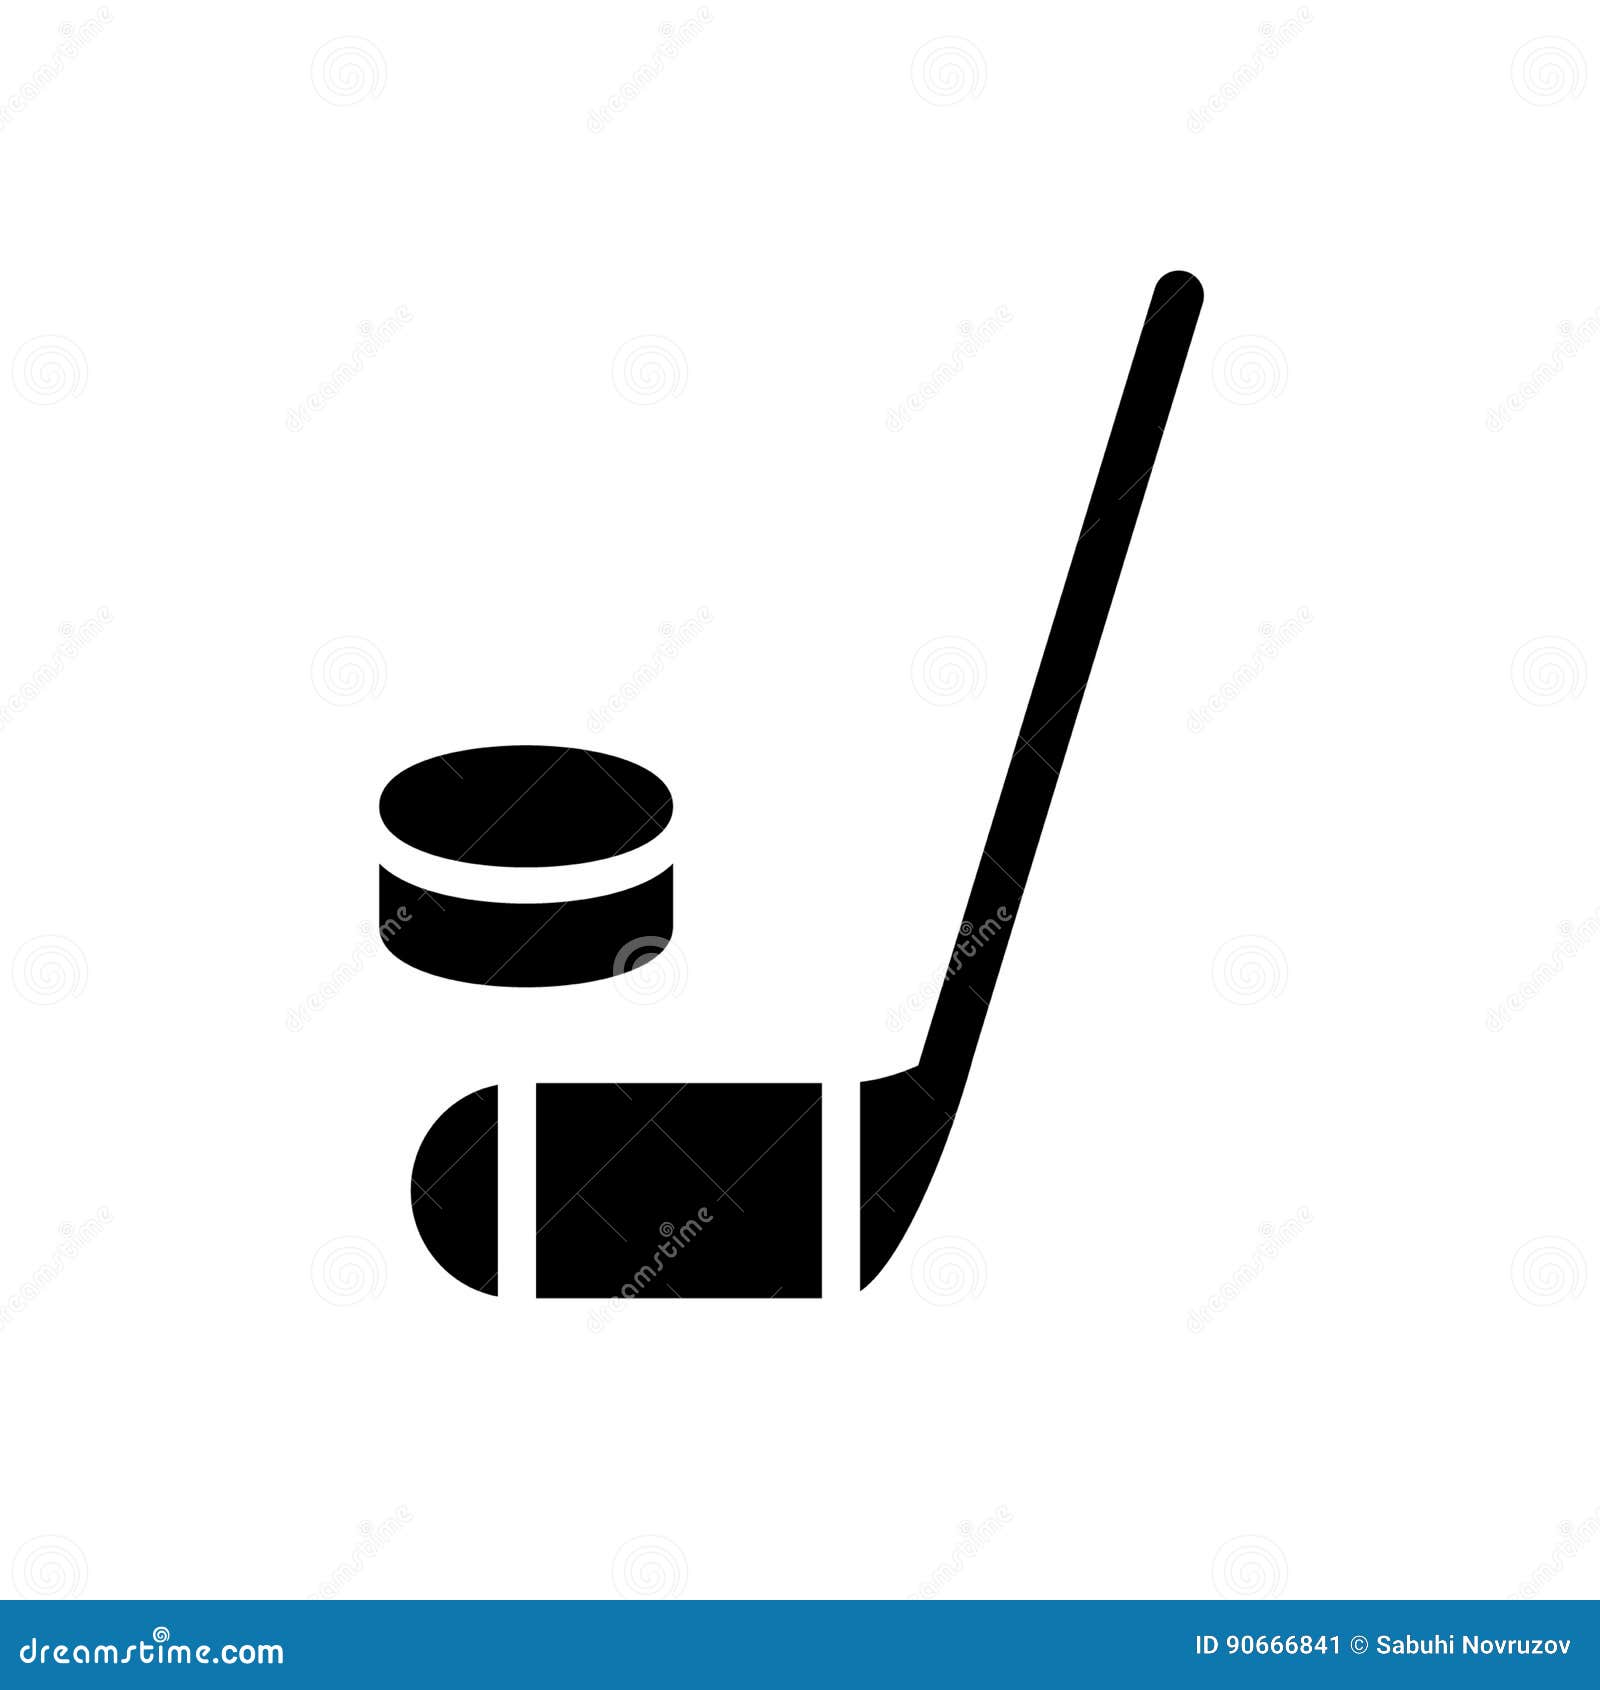 hockey stick and puck icon. simple filled hockey stick and puck  icon. on white background.